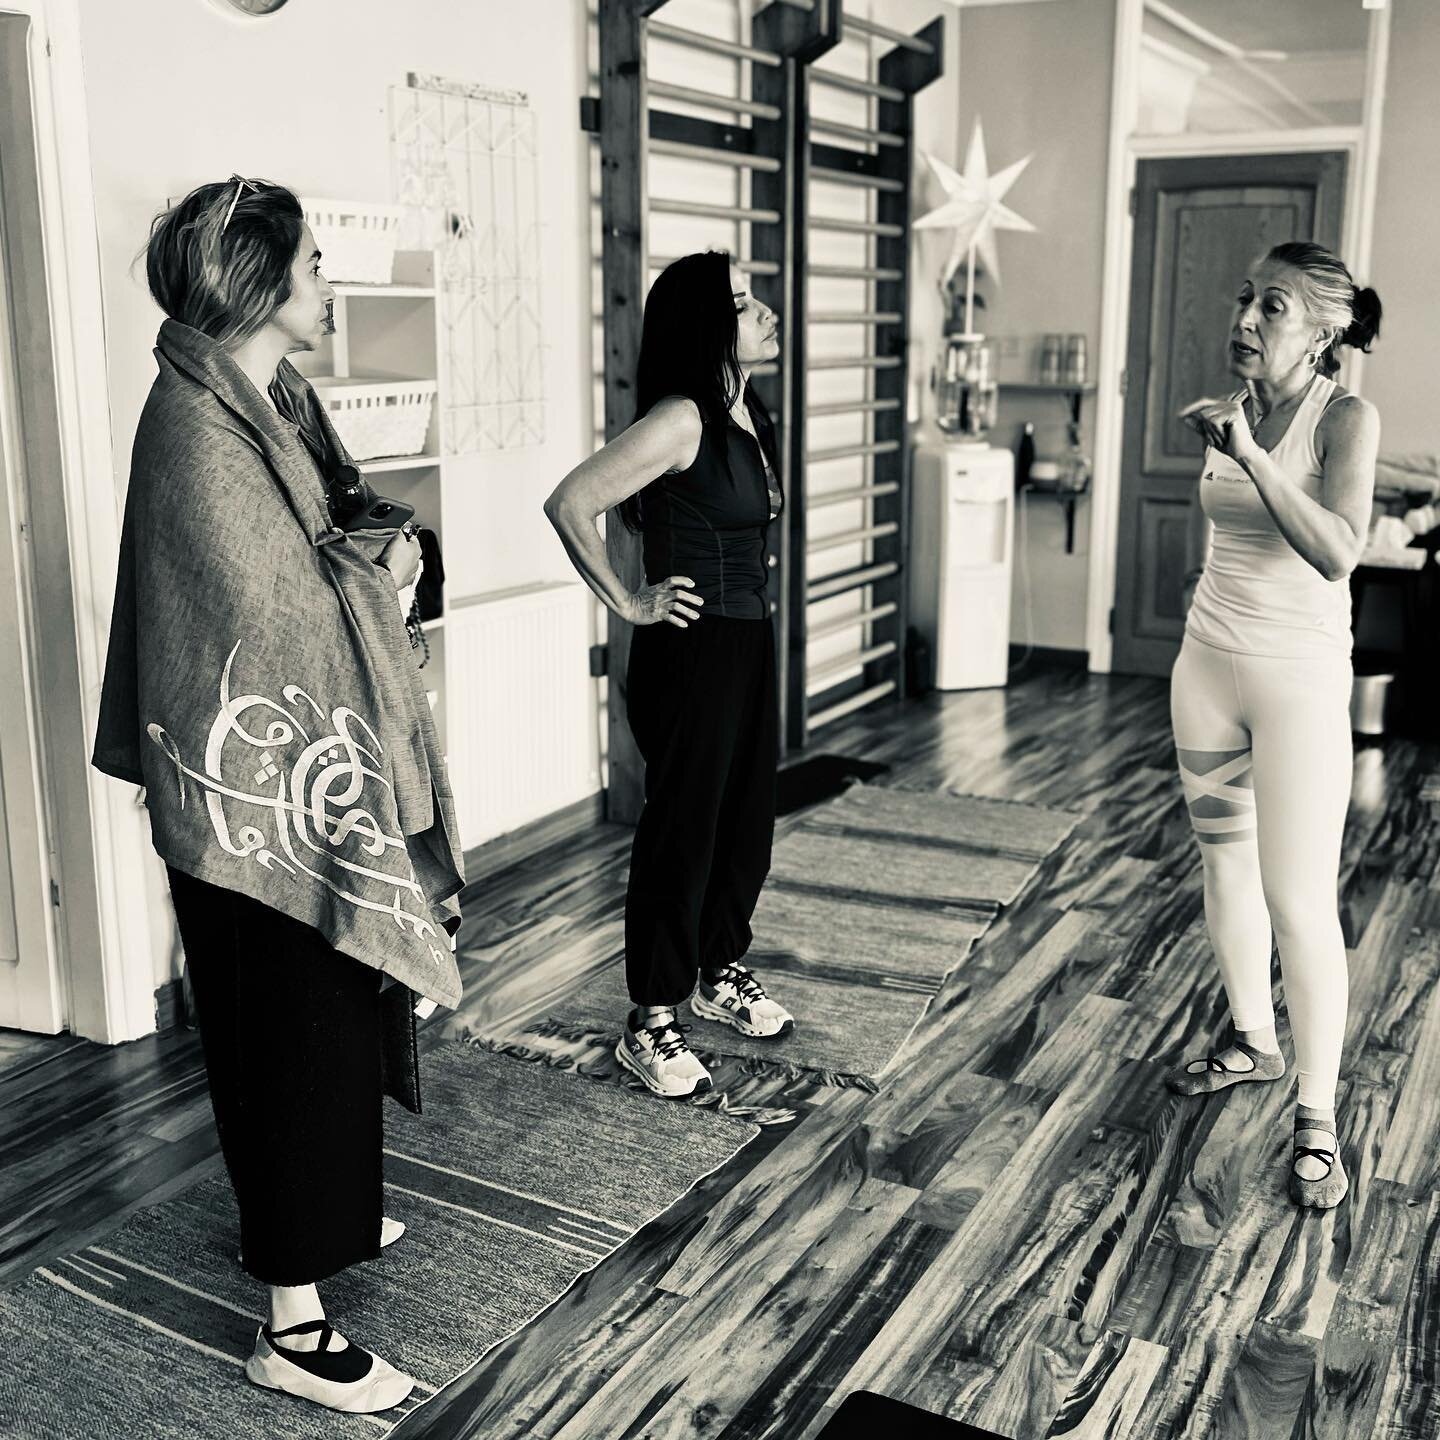 Thoughtful Thursday 💭

There are people who need to hear the wisdom you have to share. Perhaps all those hardships you&rsquo;ve had, will be the hope someone else needs to hear. 

10 years and hundreds of conversations had &ldquo;@ the barre&rdquo;.